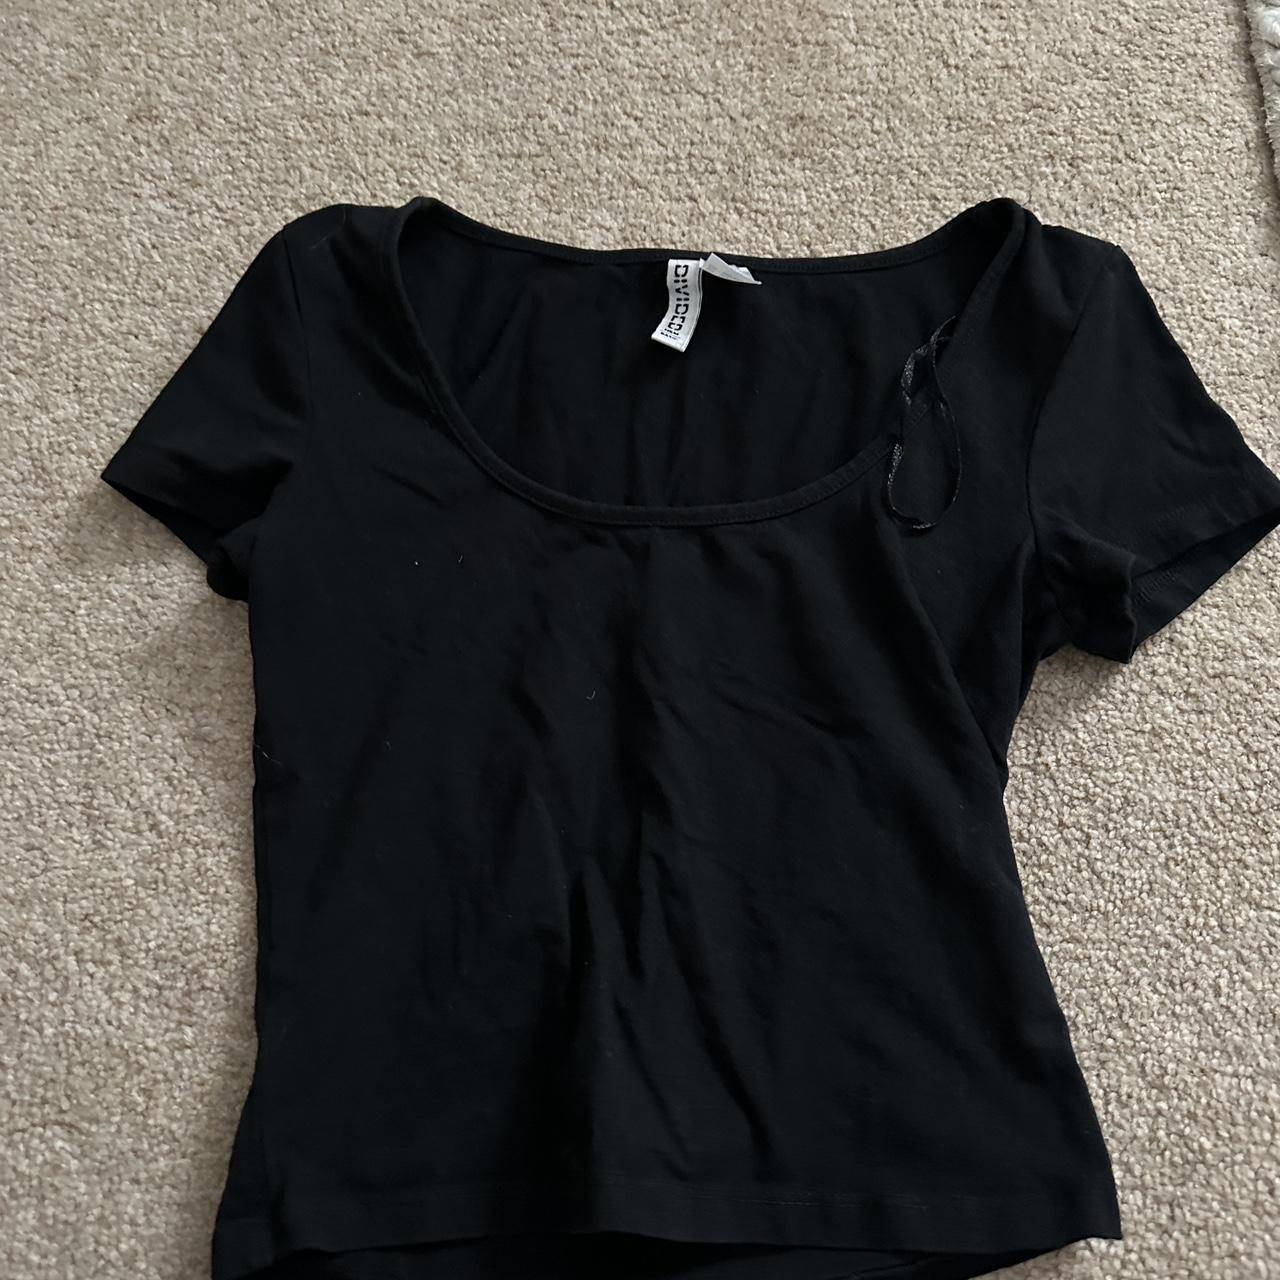 H and M crop top 9sgd- 5 pounds - Depop